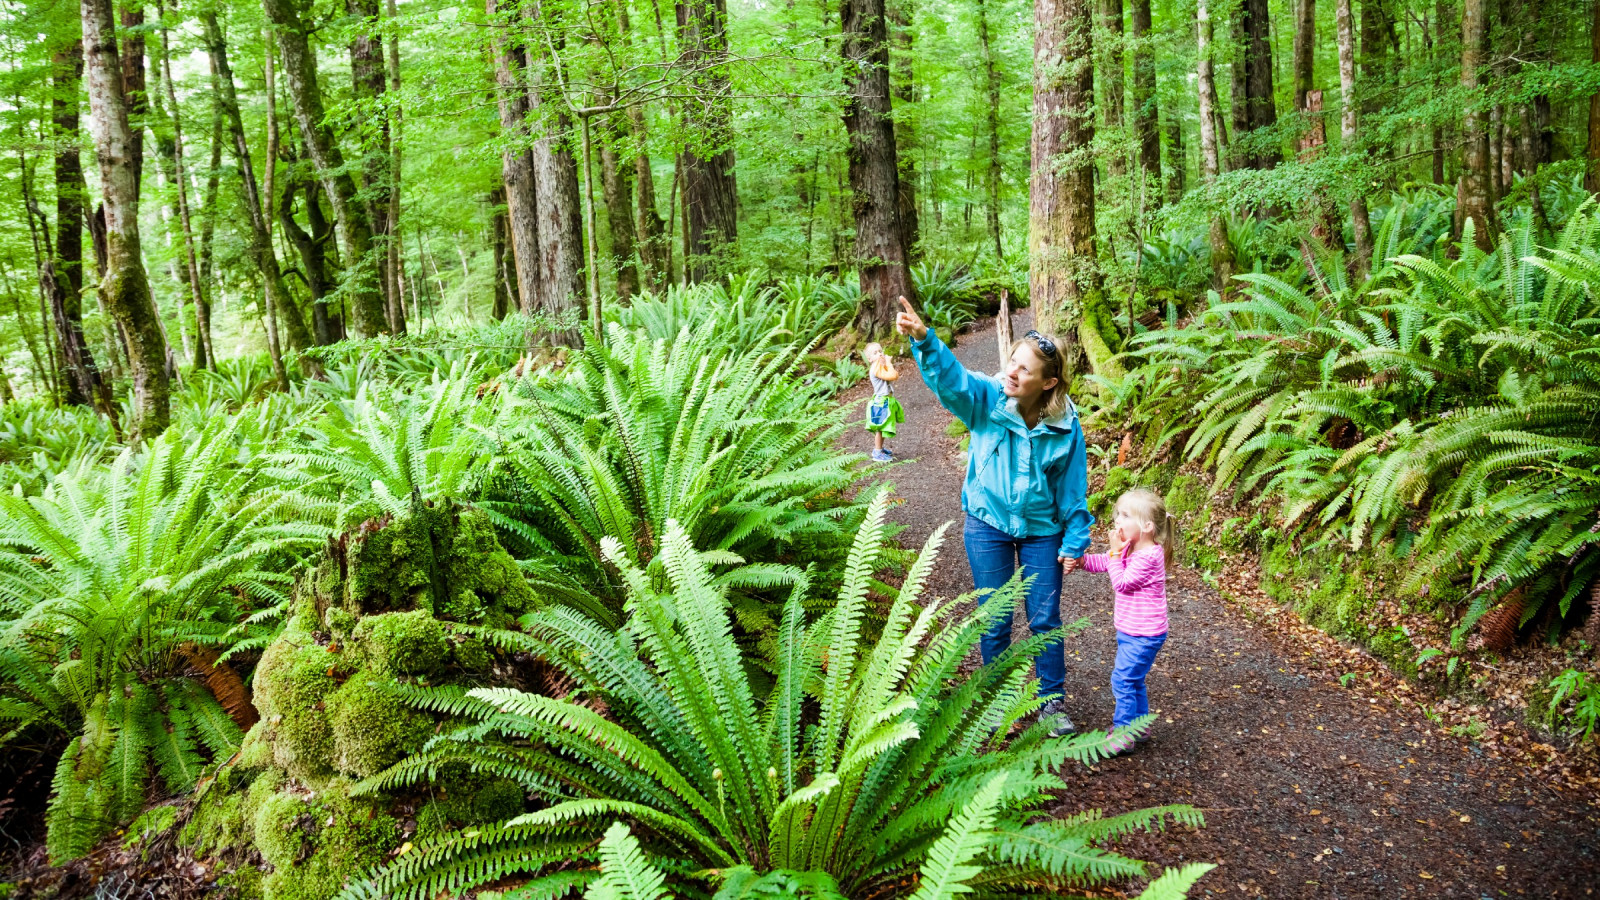 A woman and two children in a forest of tress, standing in front of ferns.